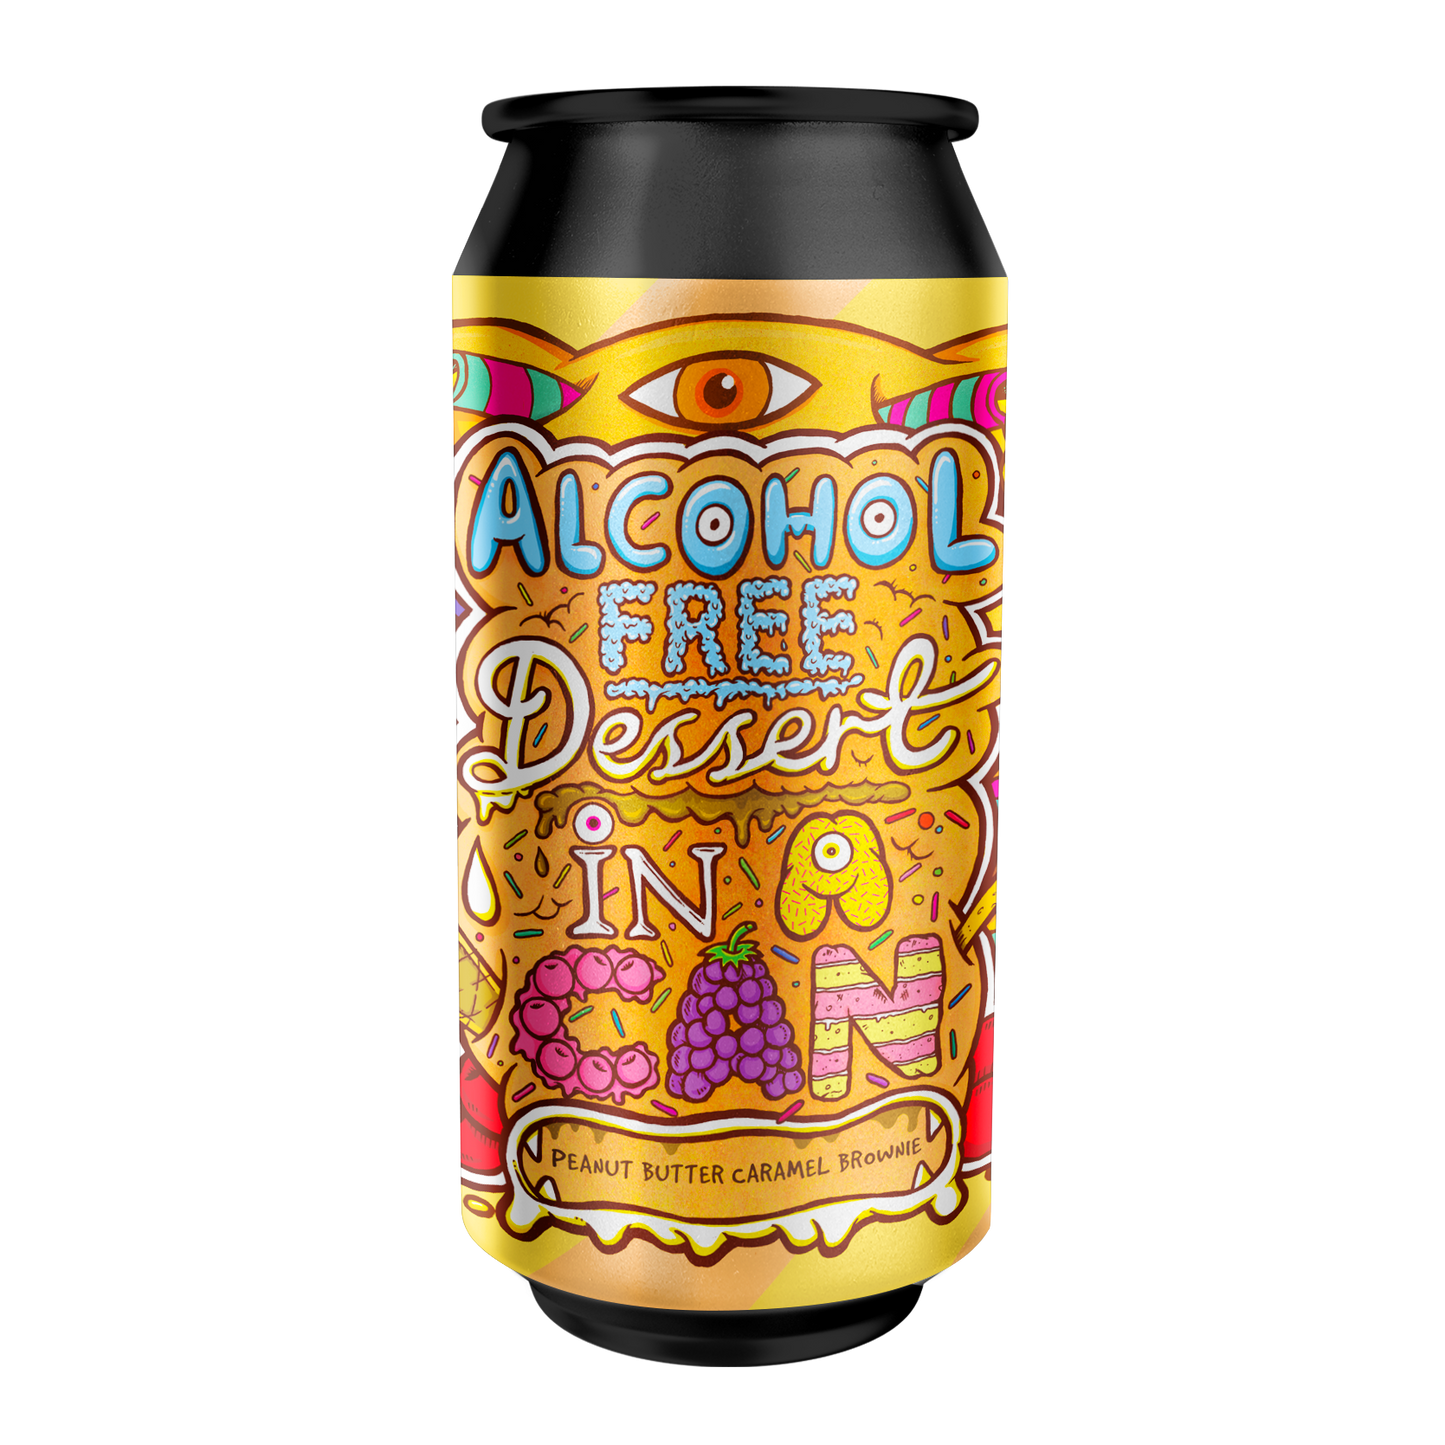 Amundsen Alcohol Free DIC - Peanut Butter Caramel Brownie 0.5% Alcohol Free Pastry Stout